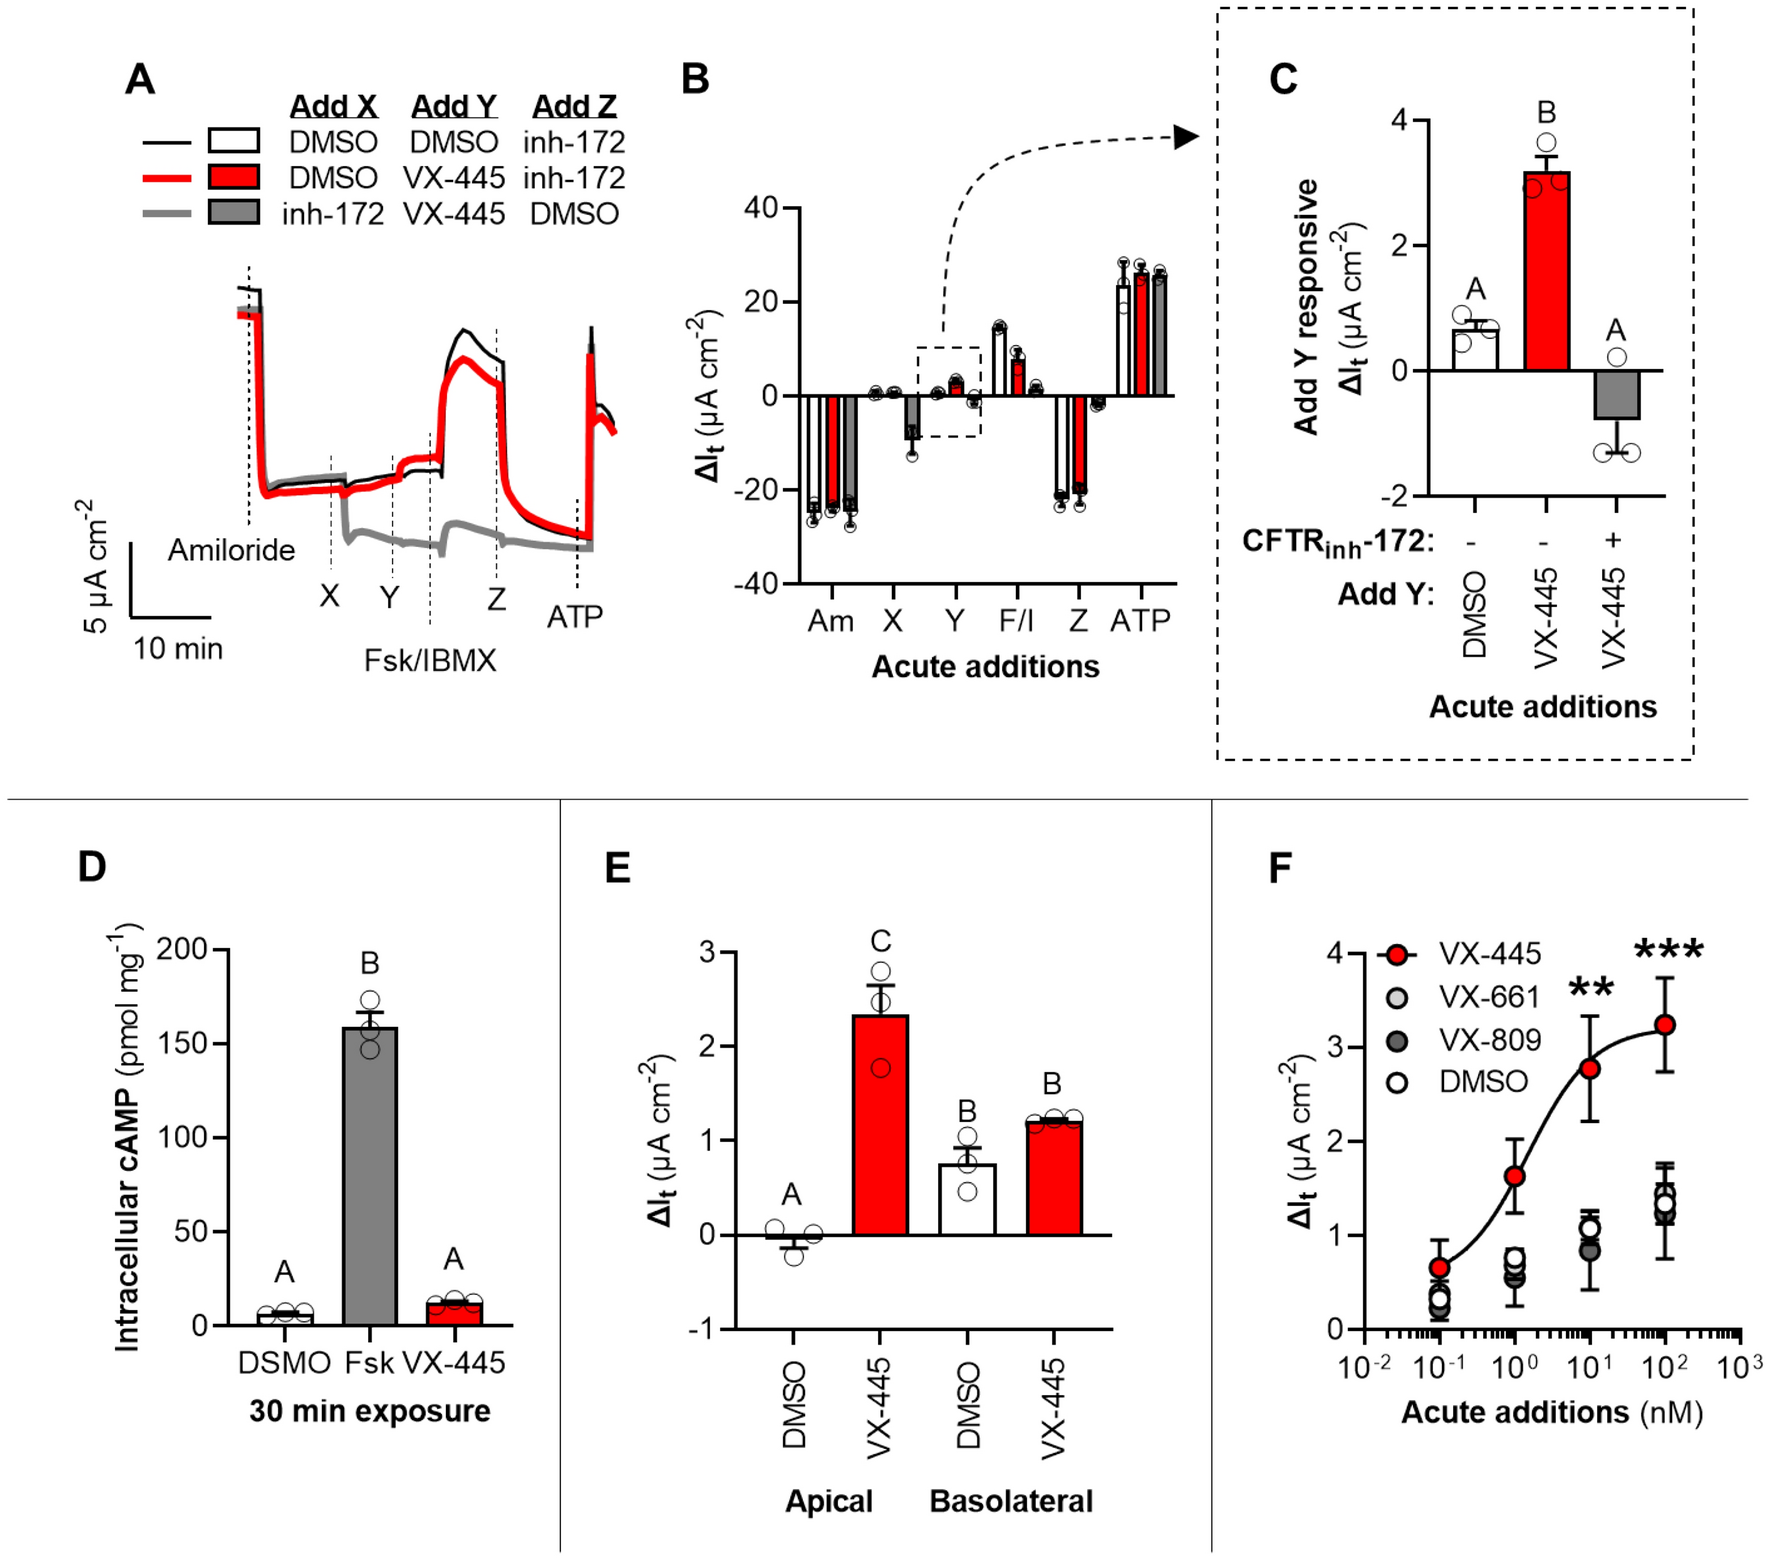 Elexacaftor is a CFTR potentiator and acts synergistically with ivacaftor  during acute and chronic treatment | Scientific Reports